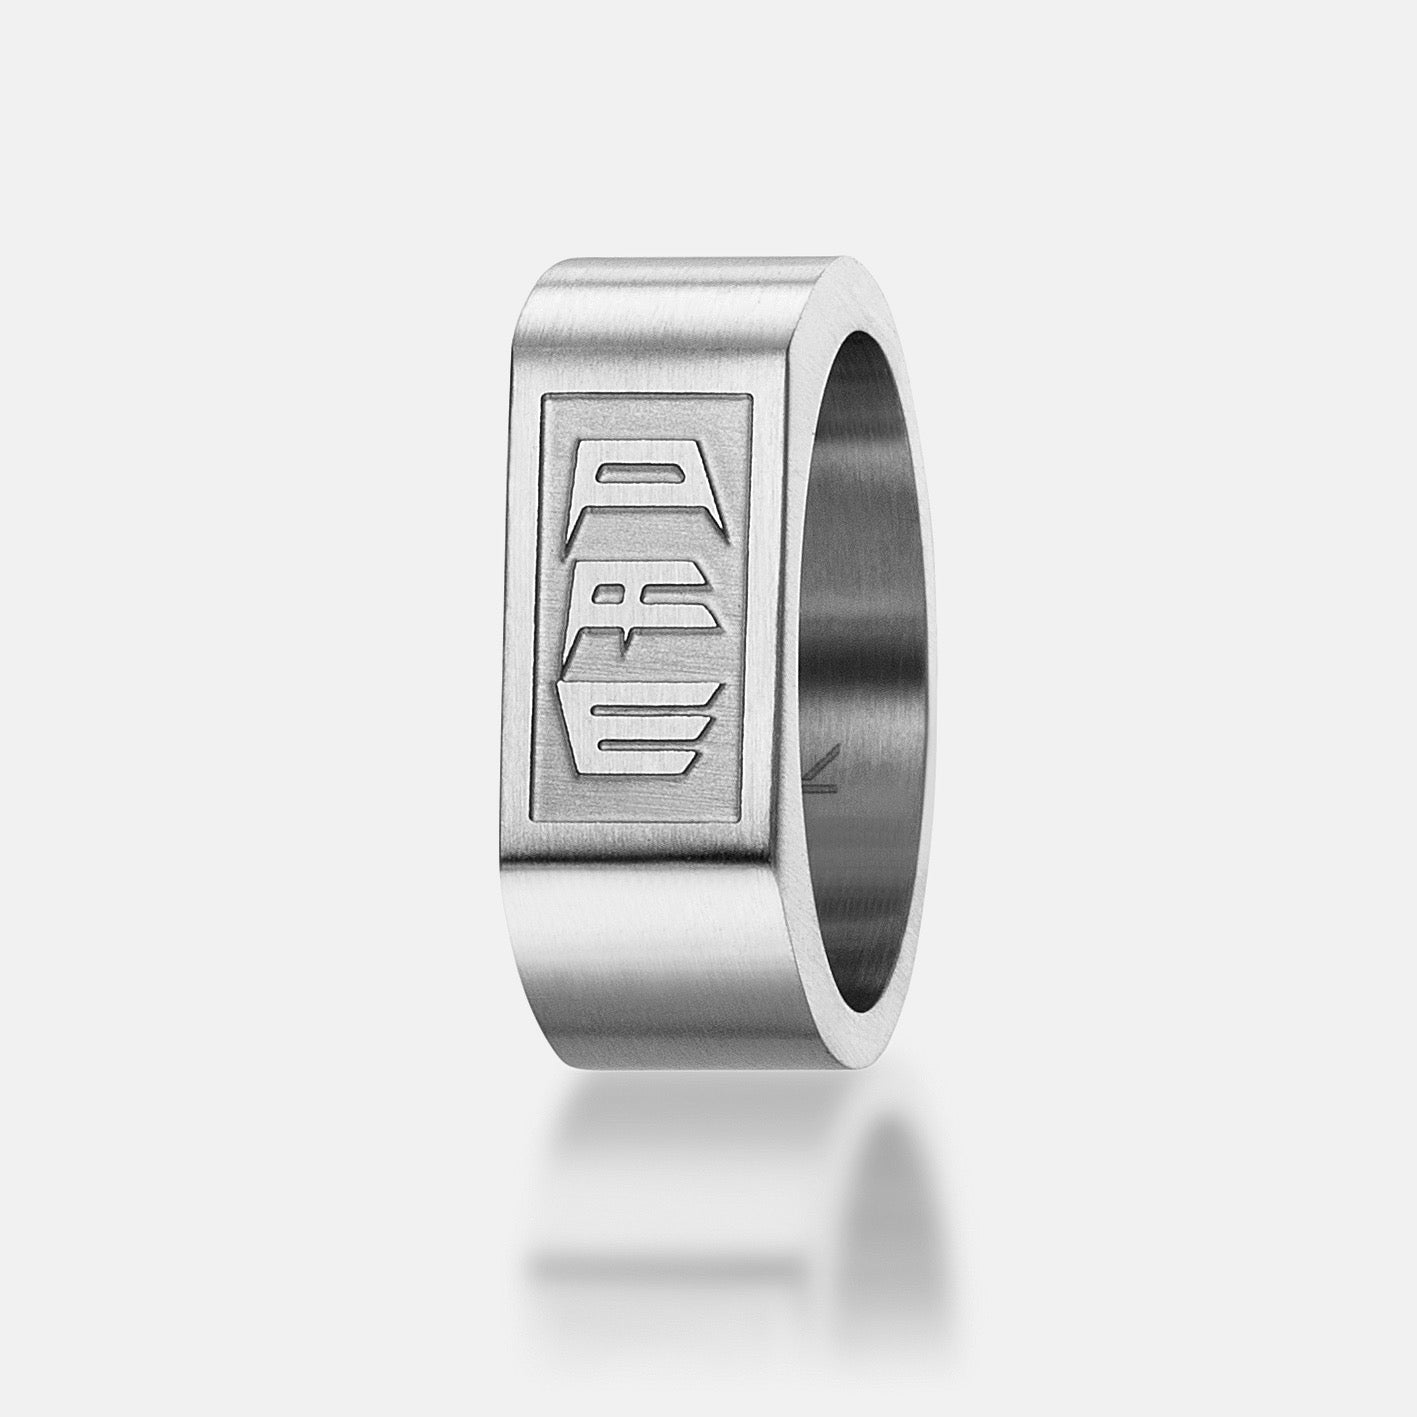 K12 - SILVER STEEL RING - MAD